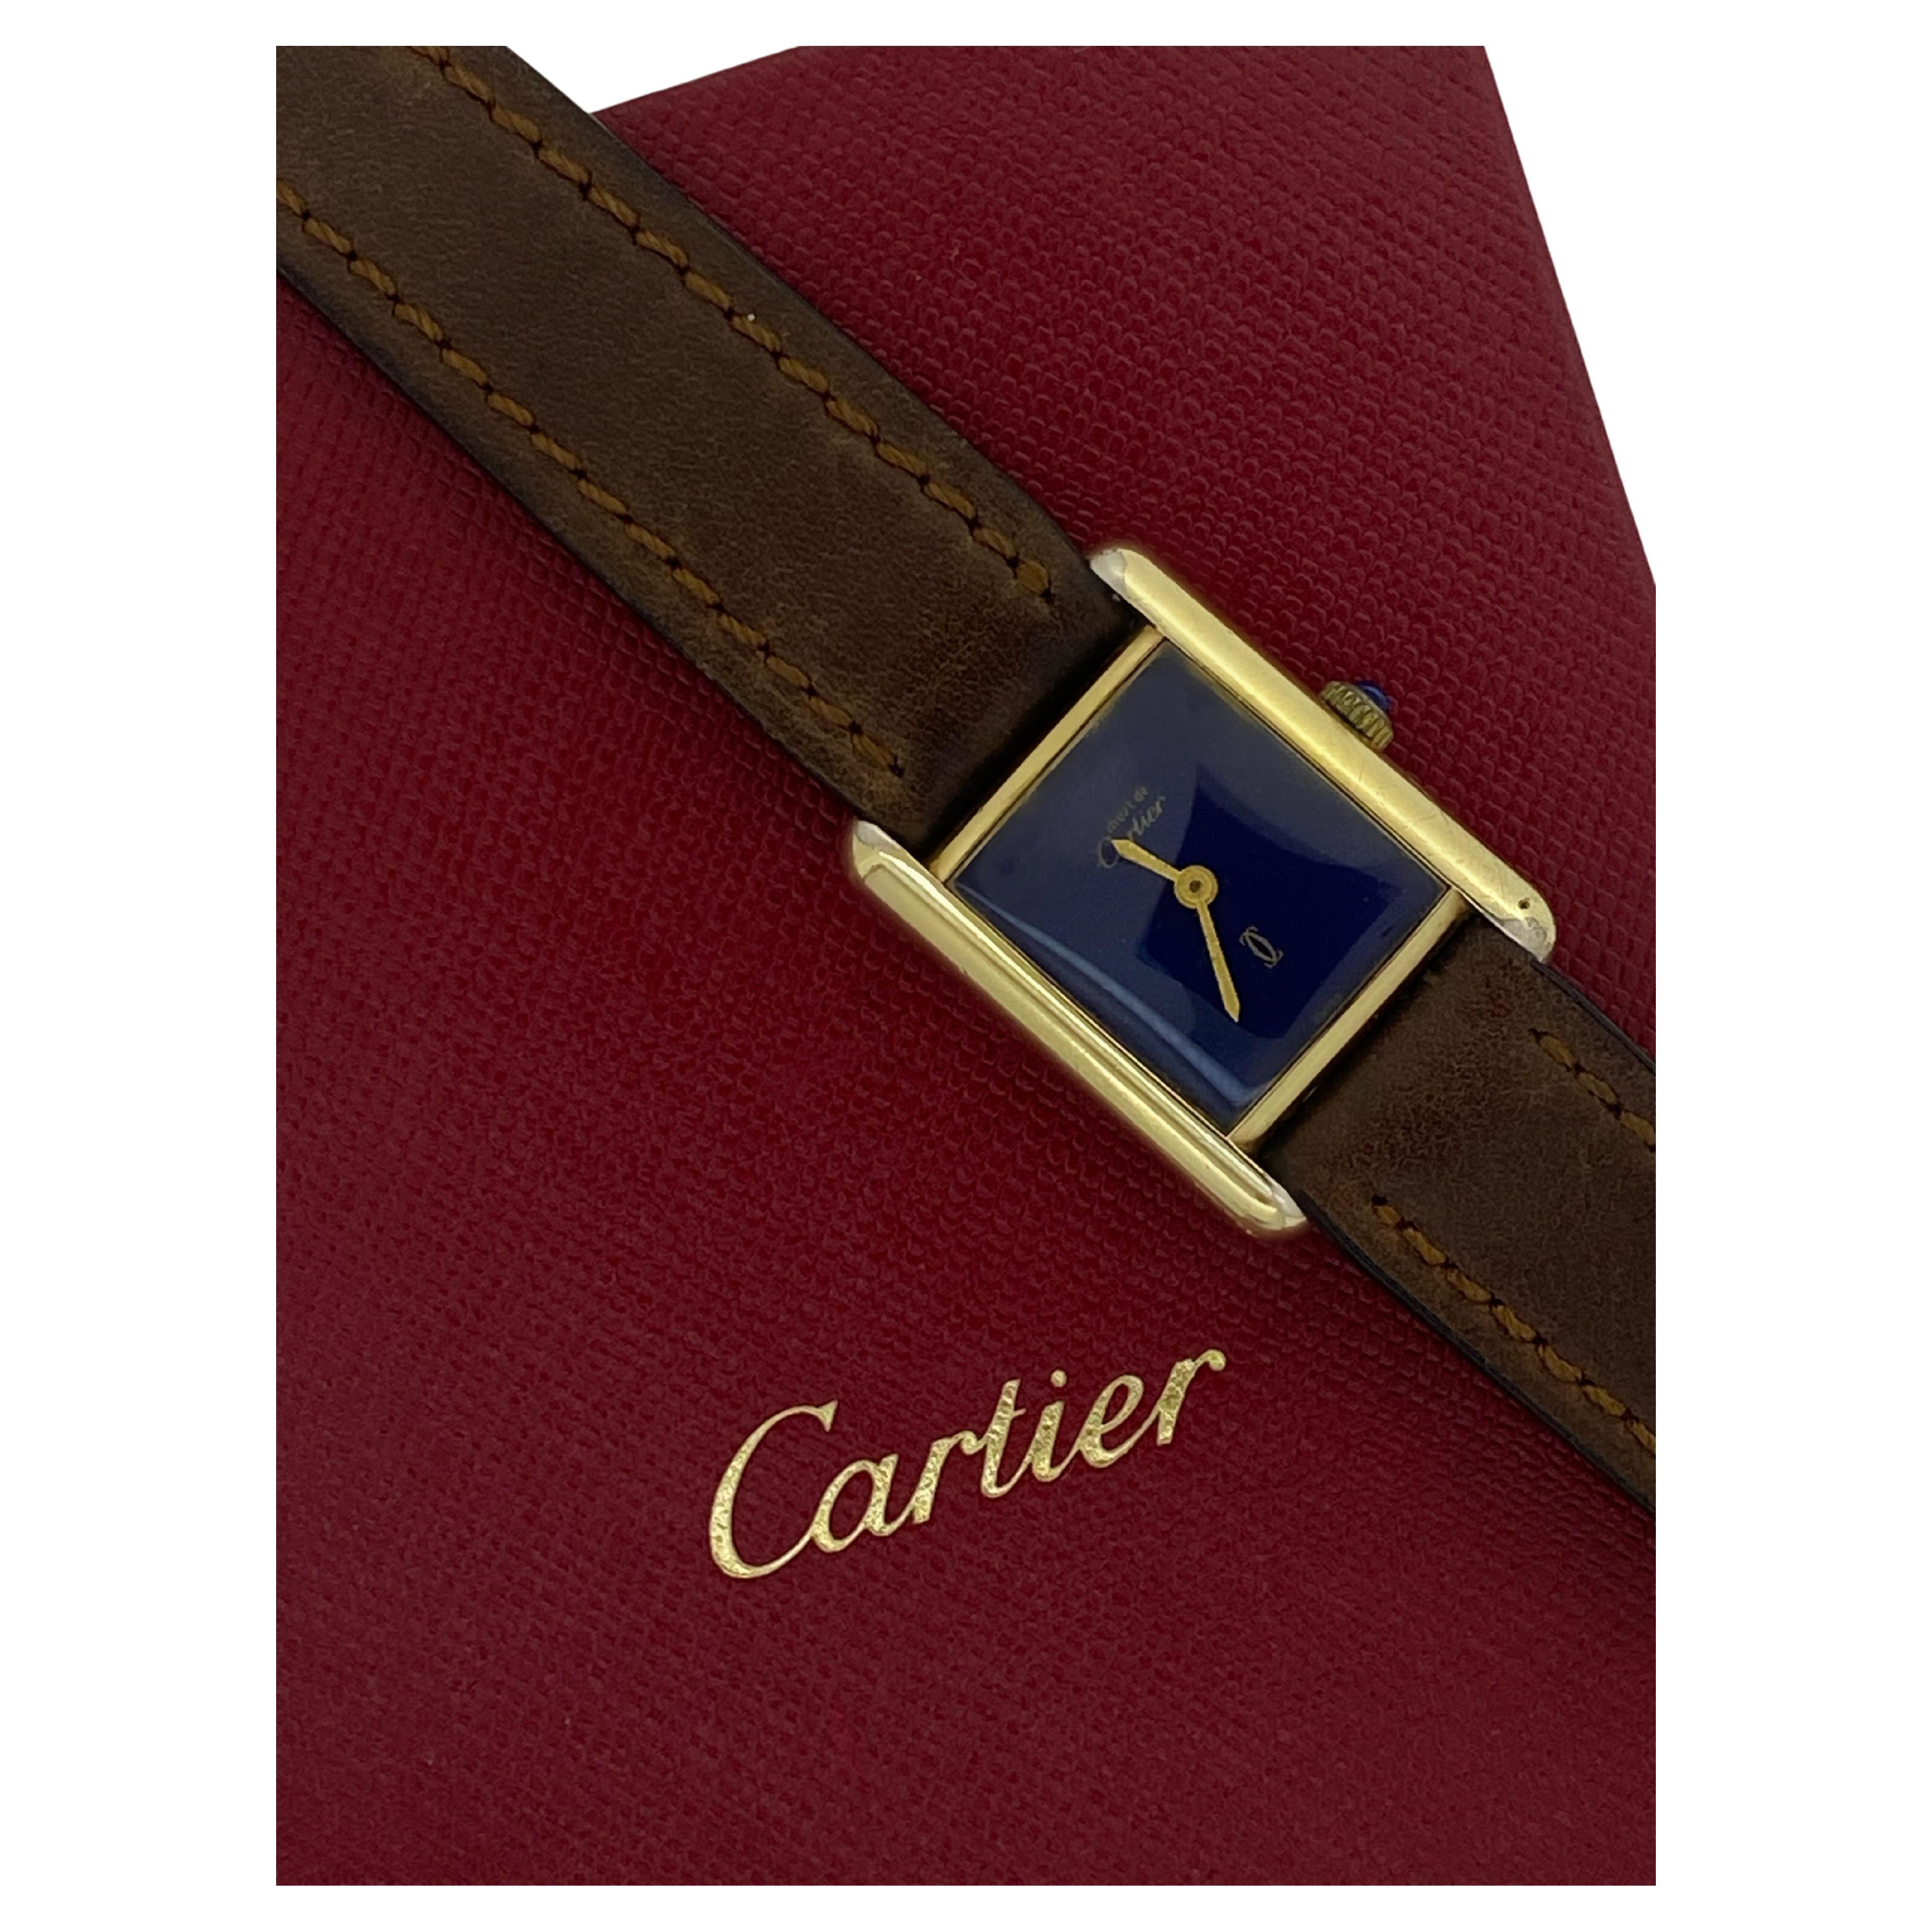 Being one of the most coveted & desirable timepieces, 
this iconic Cartier Tank Must de Cartier 
is in great condition & in excellent working order 

Dating back to 2000's
yet of timeless design 
this timepiece is a genuine eye-catcher!

~~~

The